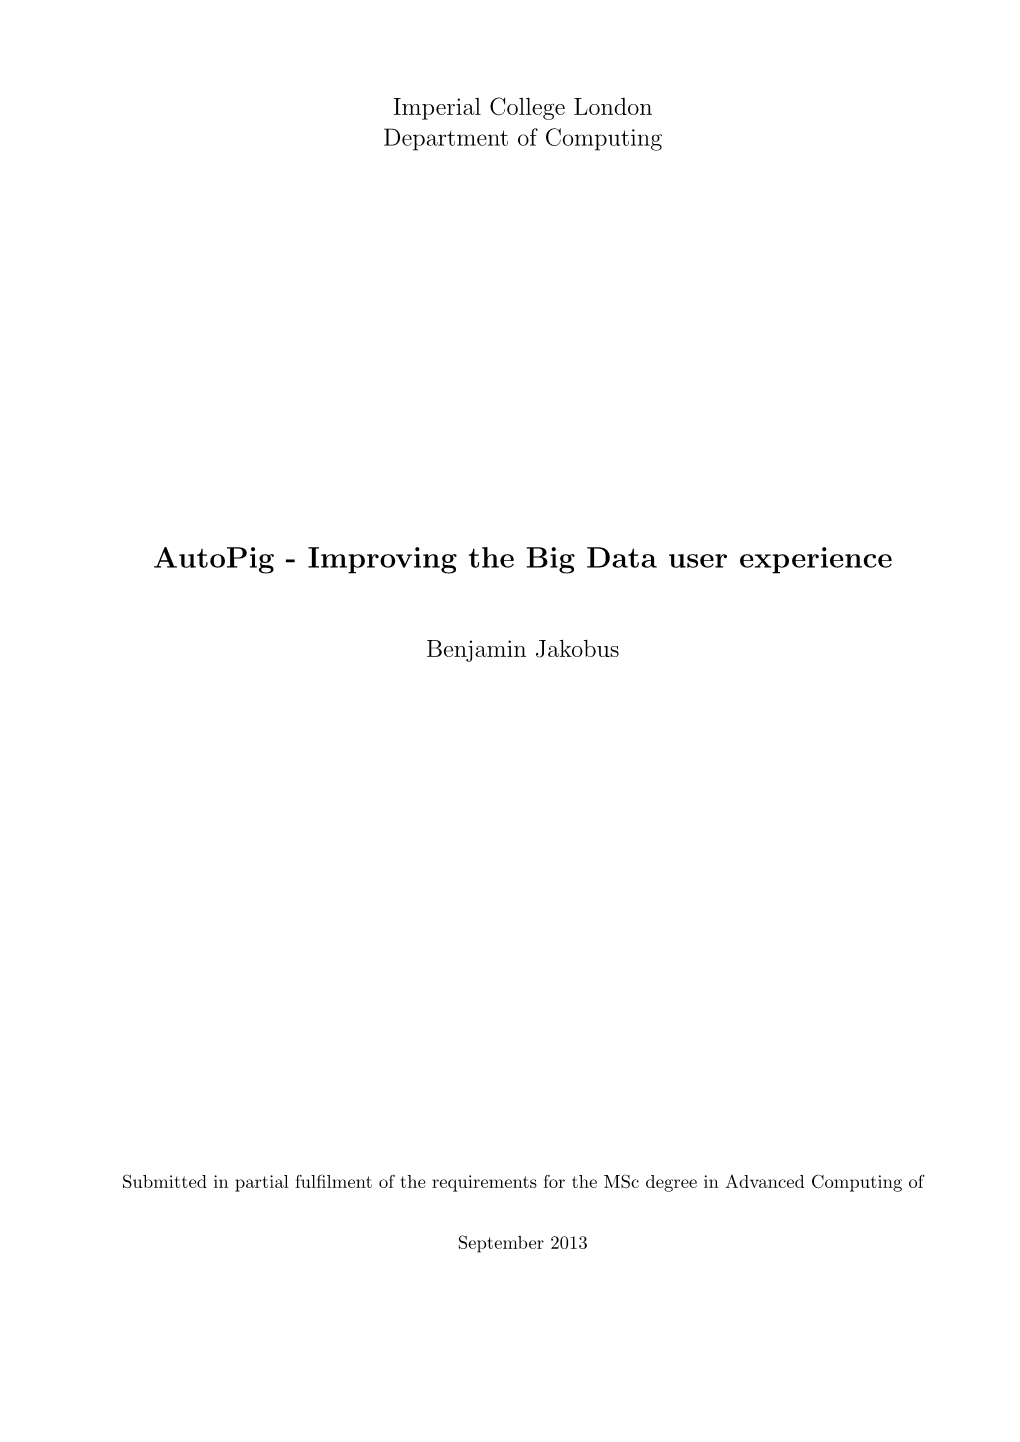 Improving the Big Data User Experience